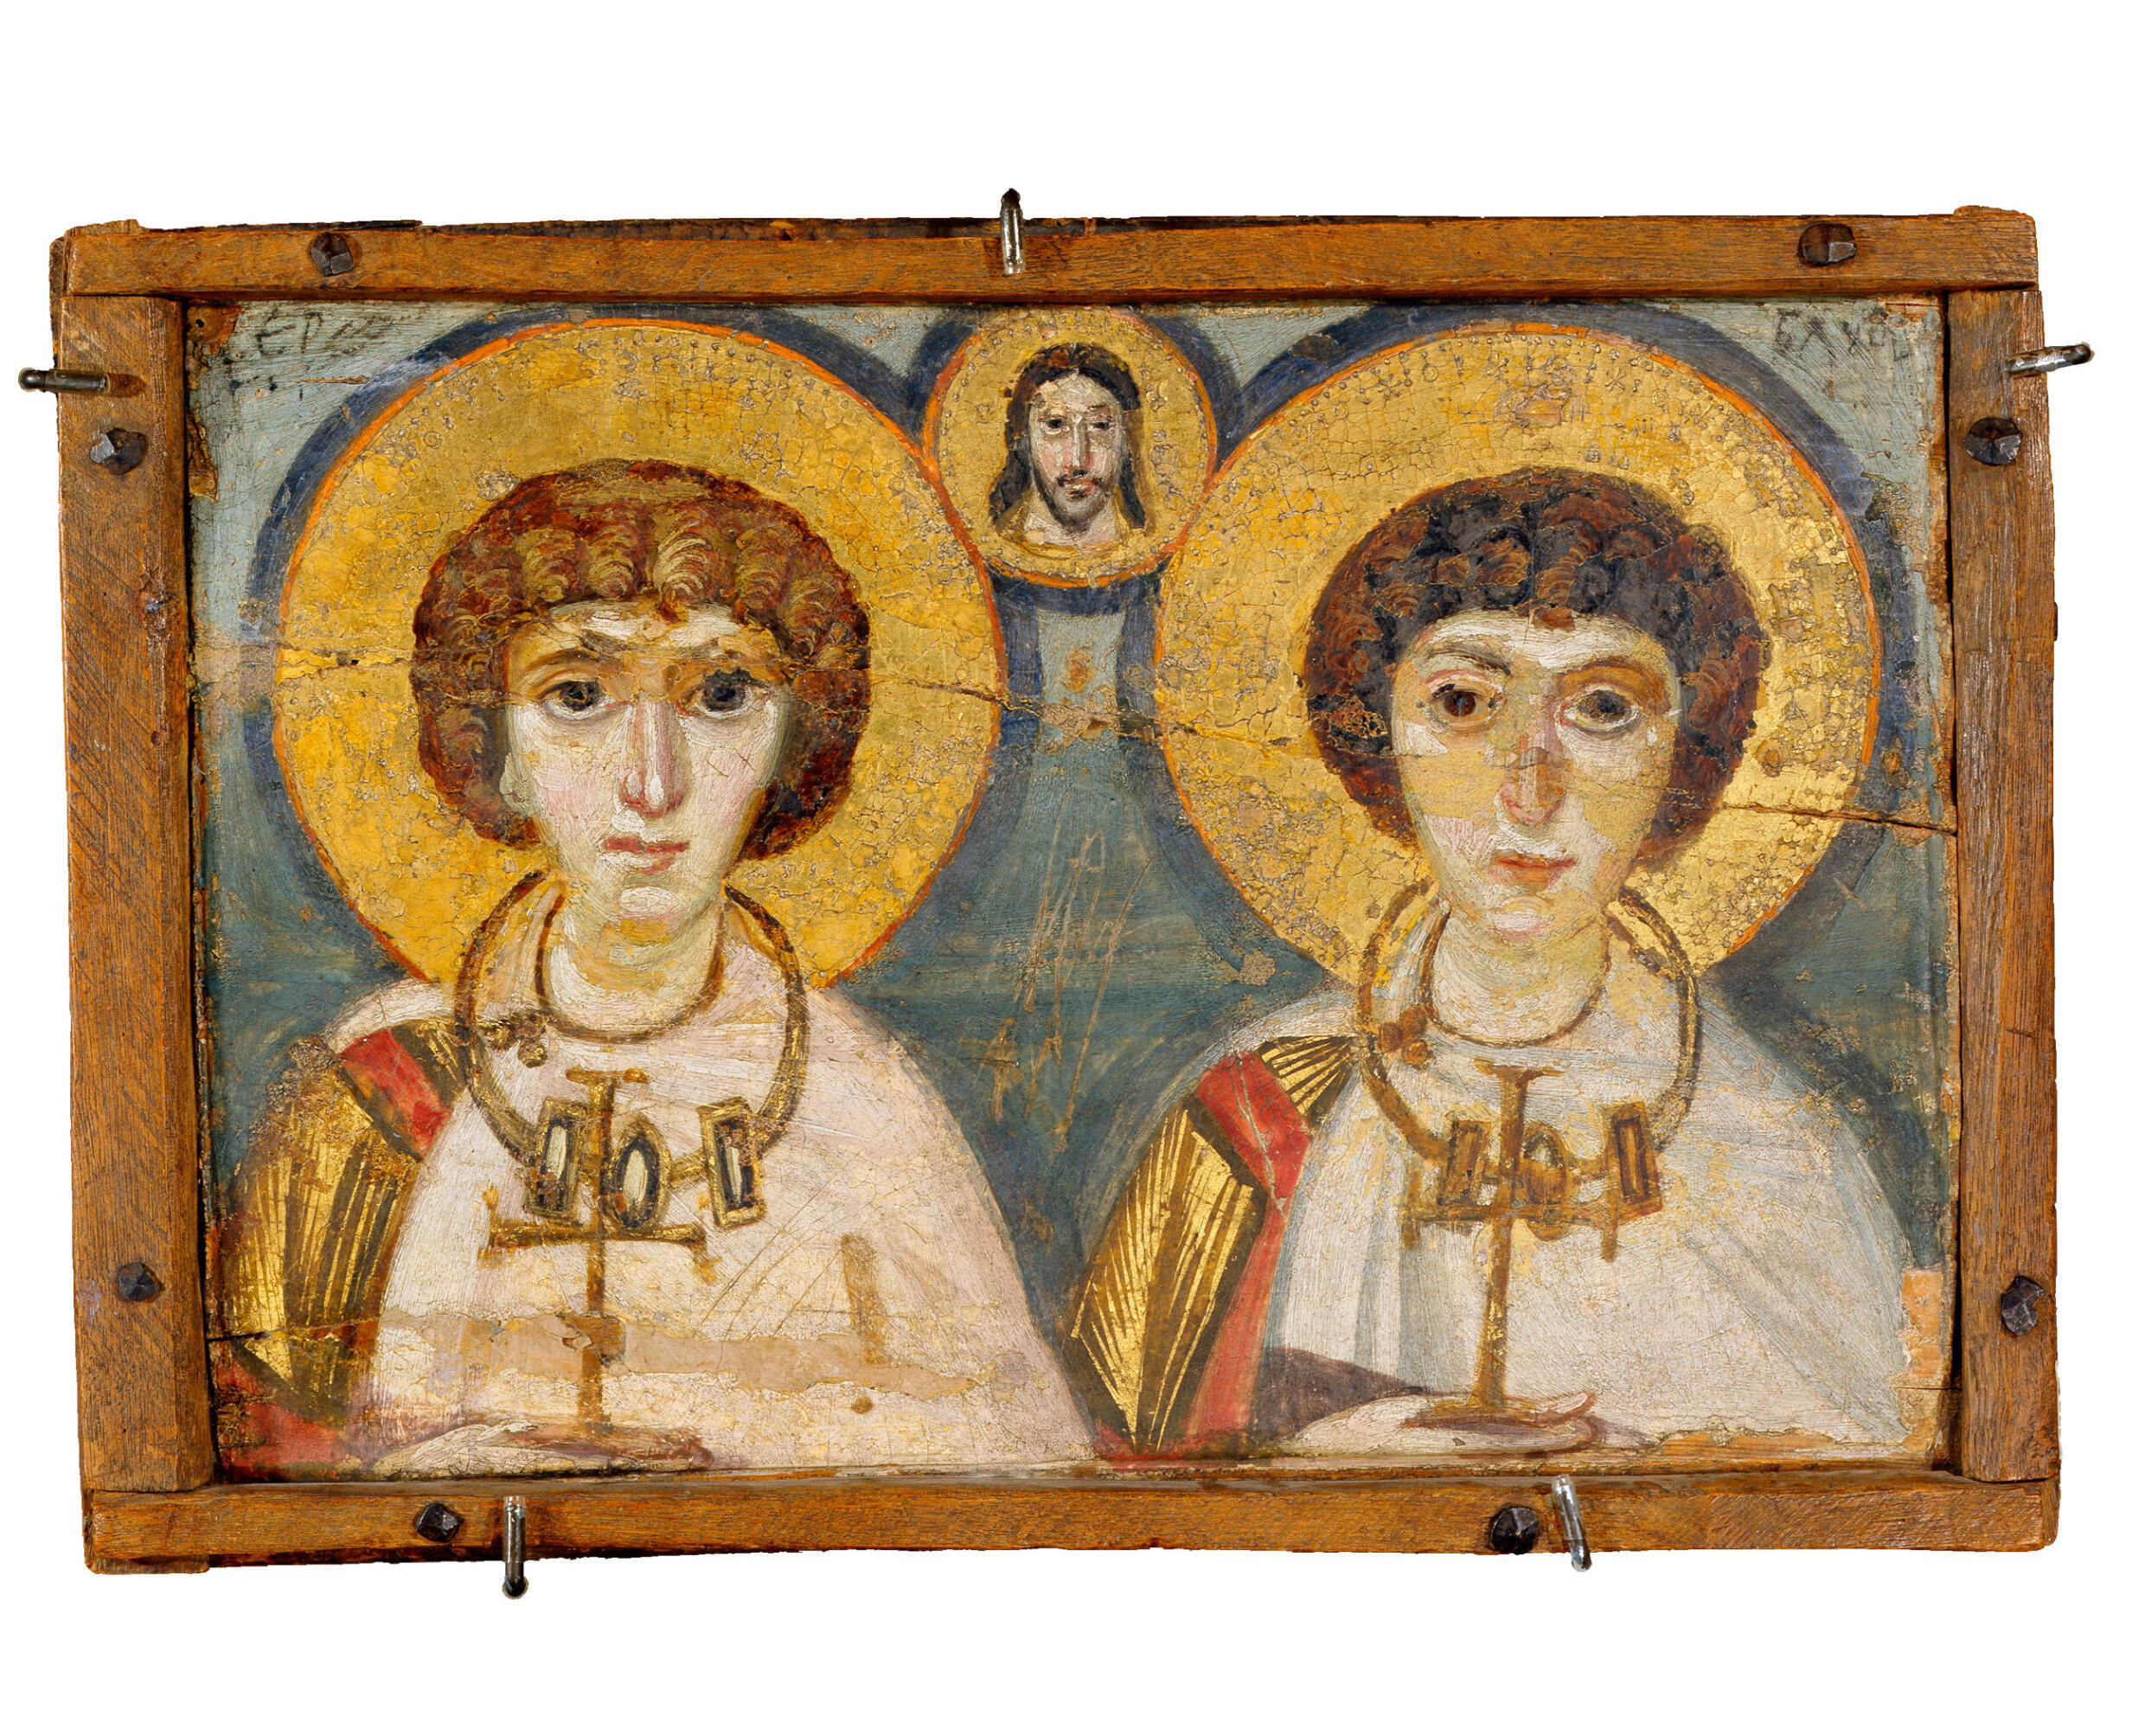 This Byzantine icon of Saints Sergius and Bacchus, dating from 6th-7th centuries, went on show at the Louvre after it was evacuated from Ukraine.